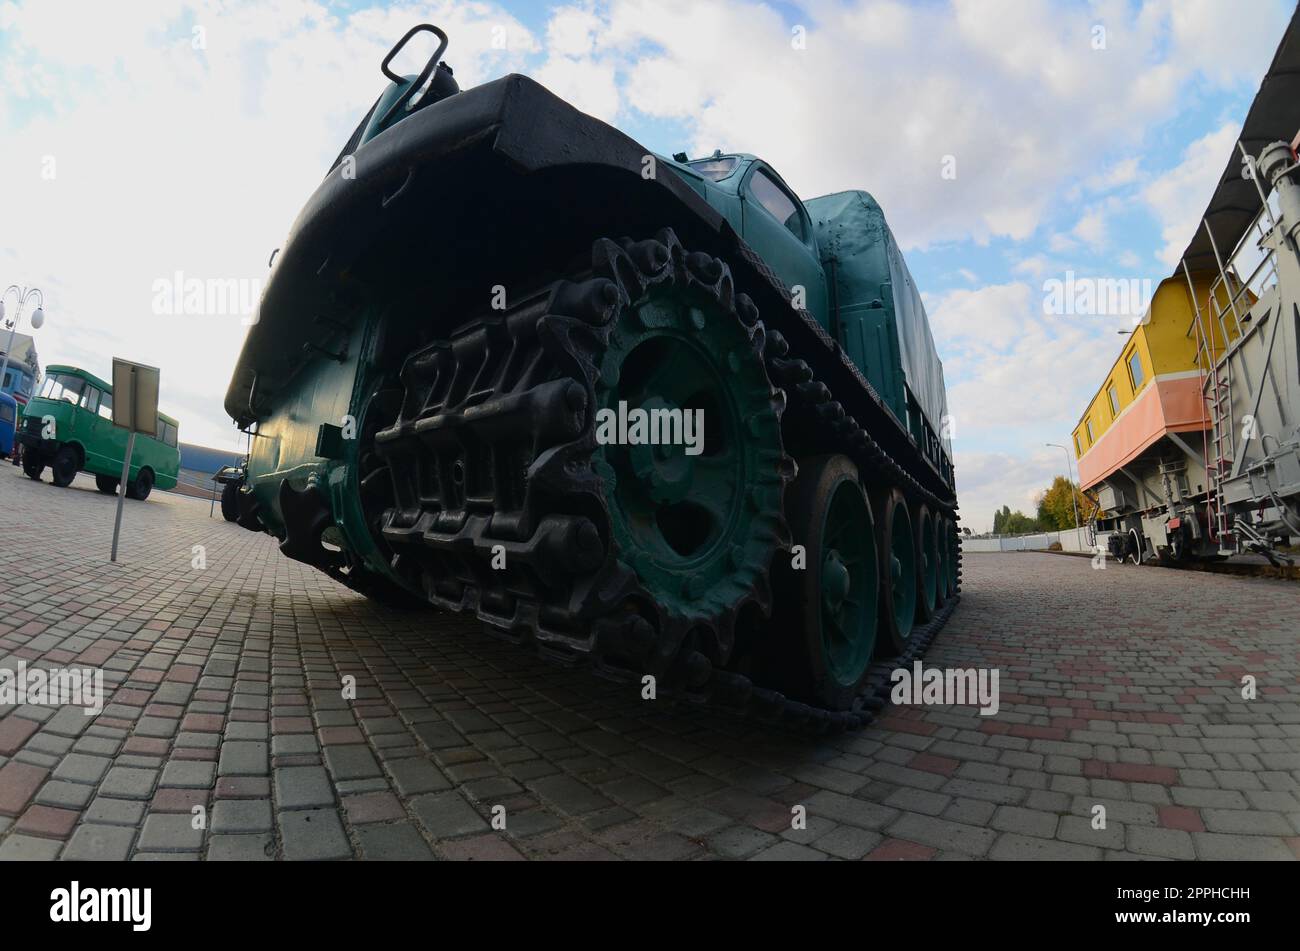 Photo of a Russian green armored car on a caterpillar track among the railway trains. Strong distortion from the fisheye lens Stock Photo